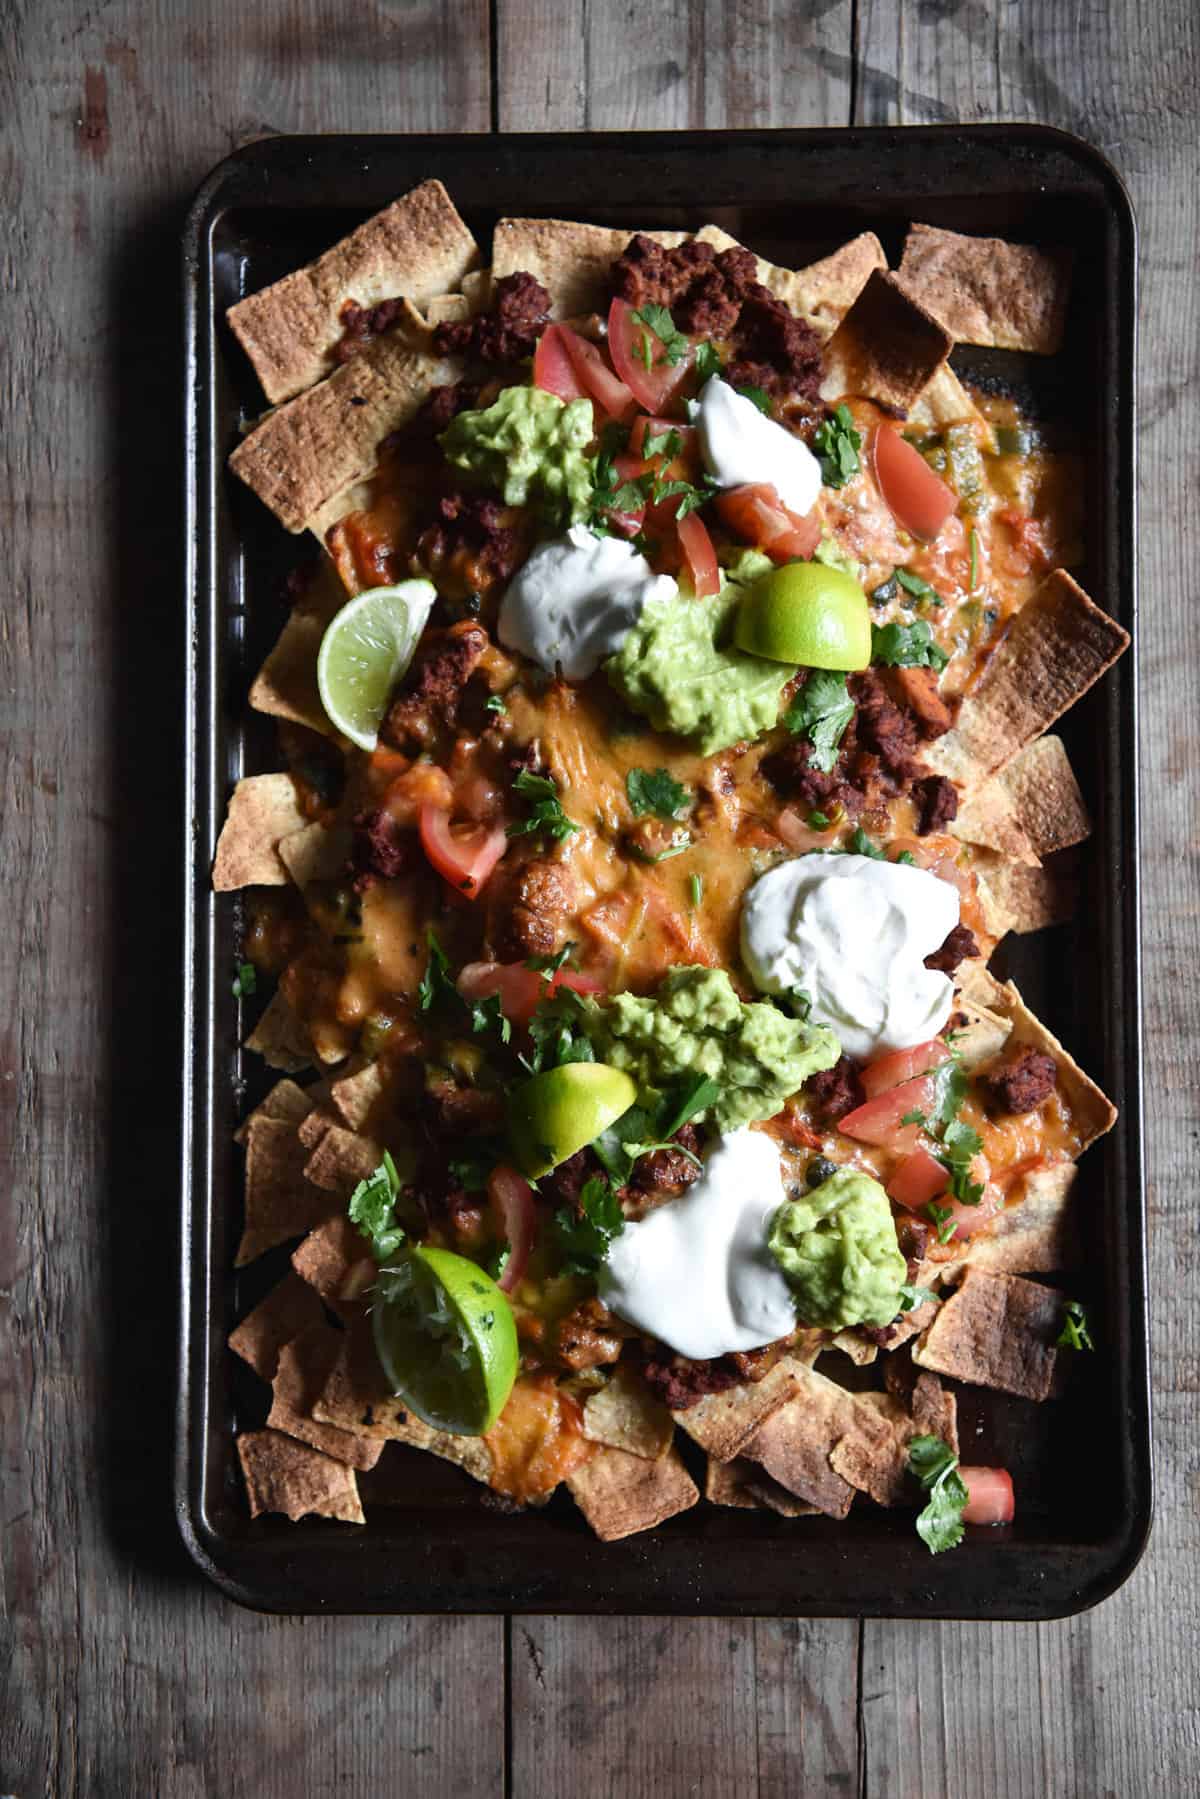 Vegetarian nachos with 'mince' queso, guacamole and salsa. Gluten free and FODMAP friendly, from www.georgeats.com